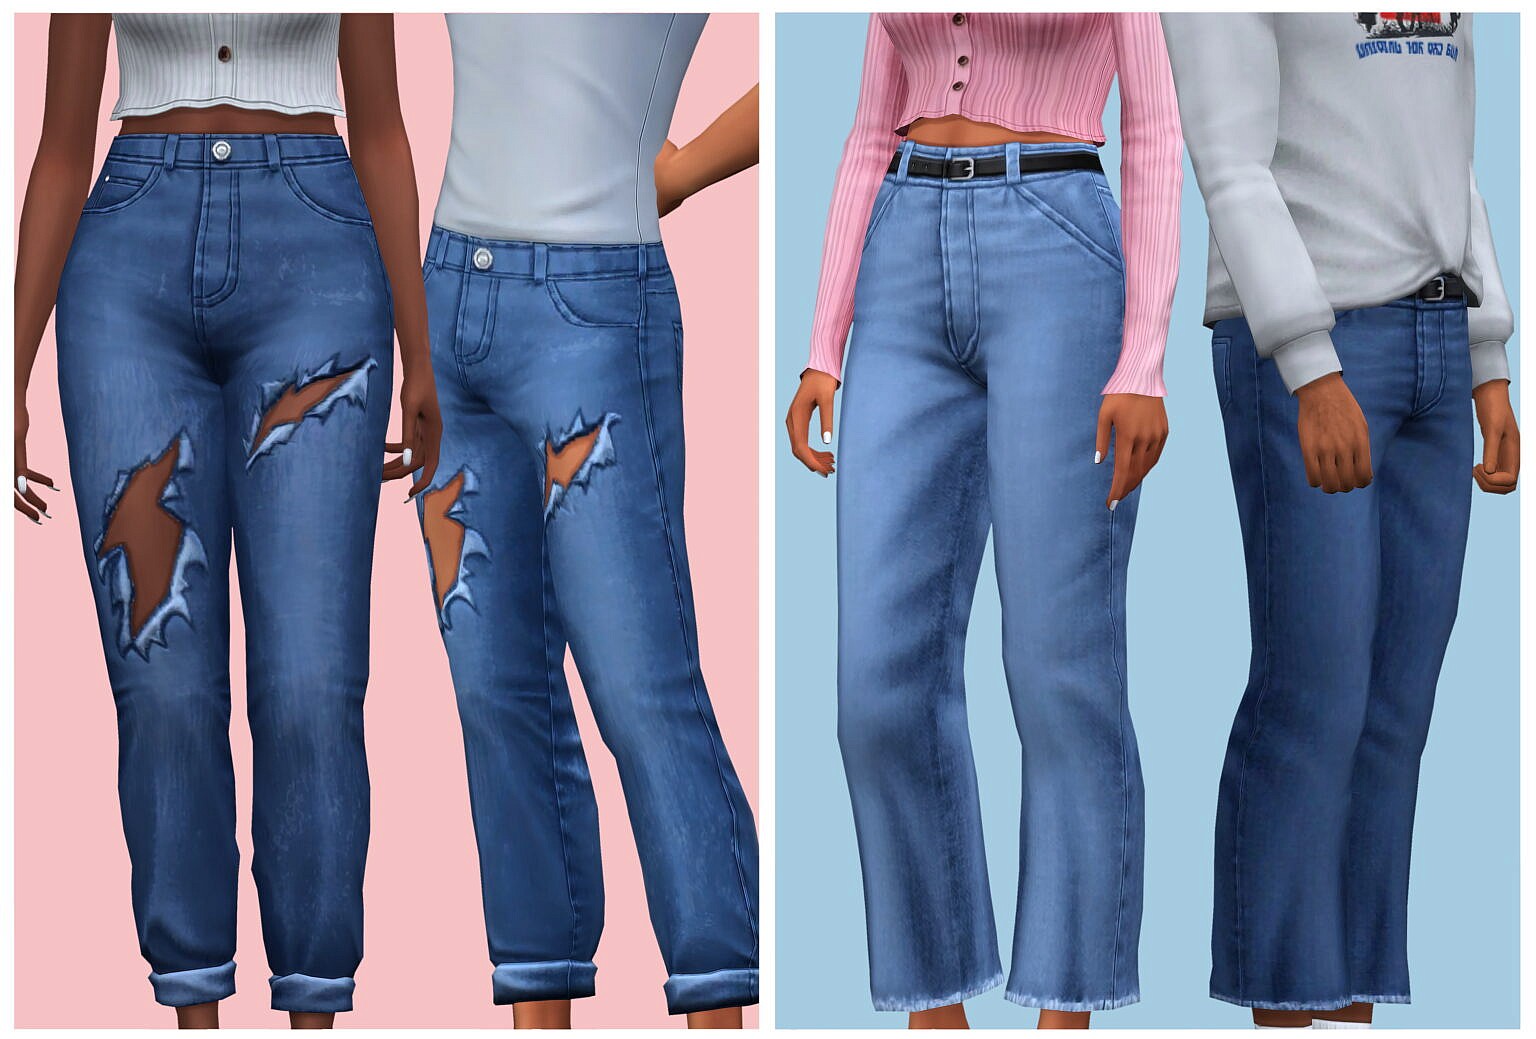 sims 4 mods download 2021